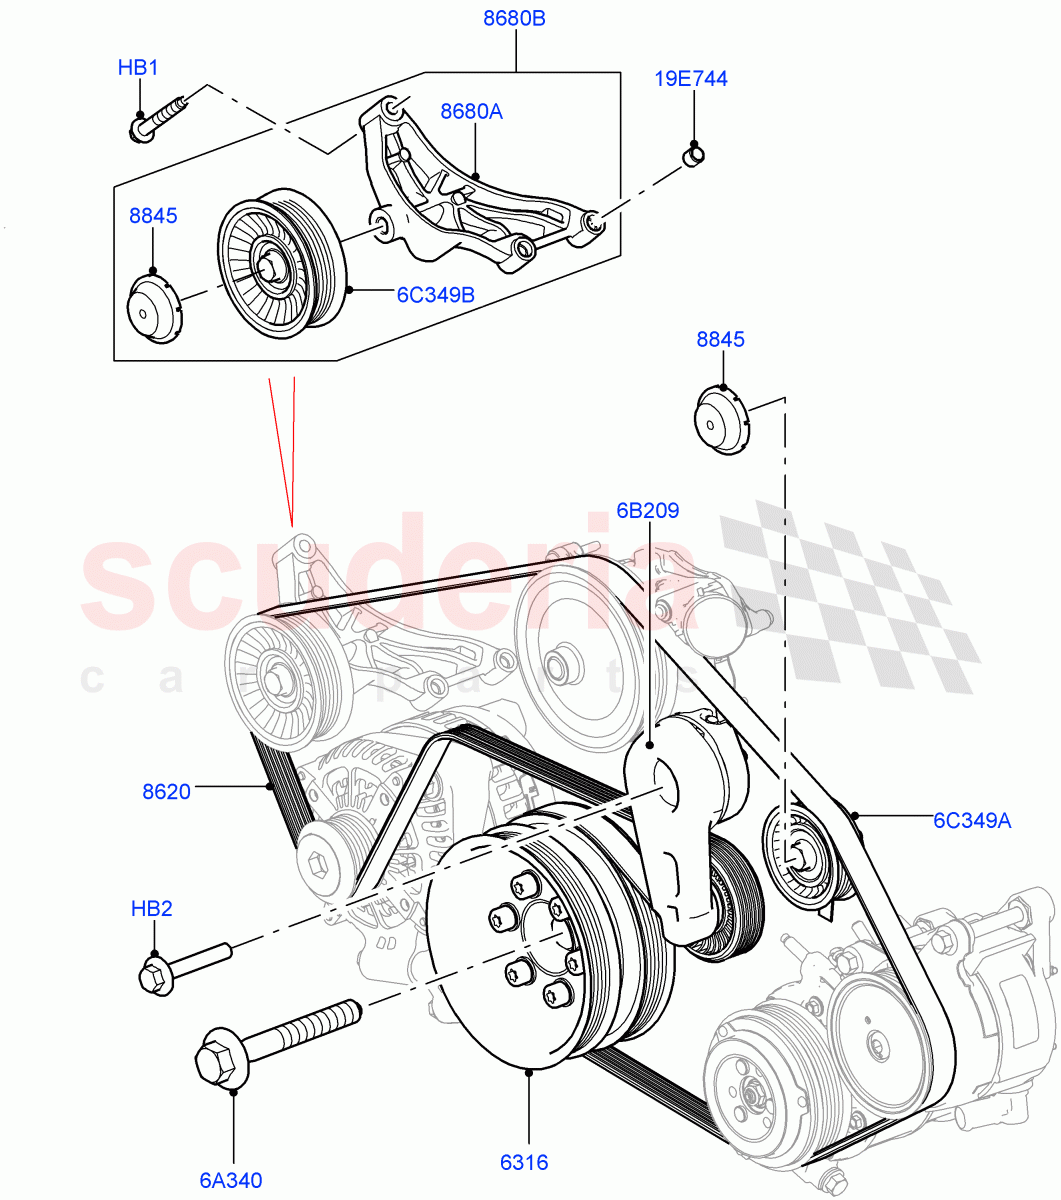 Pulleys And Drive Belts(Primary Drive)(5.0L P AJ133 DOHC CDA S/C Enhanced,With ACE Suspension,5.0 Petrol AJ133 DOHC CDA)((V)FROMJA000001,(V)TOJA999999) of Land Rover Land Rover Range Rover Sport (2014+) [5.0 OHC SGDI SC V8 Petrol]